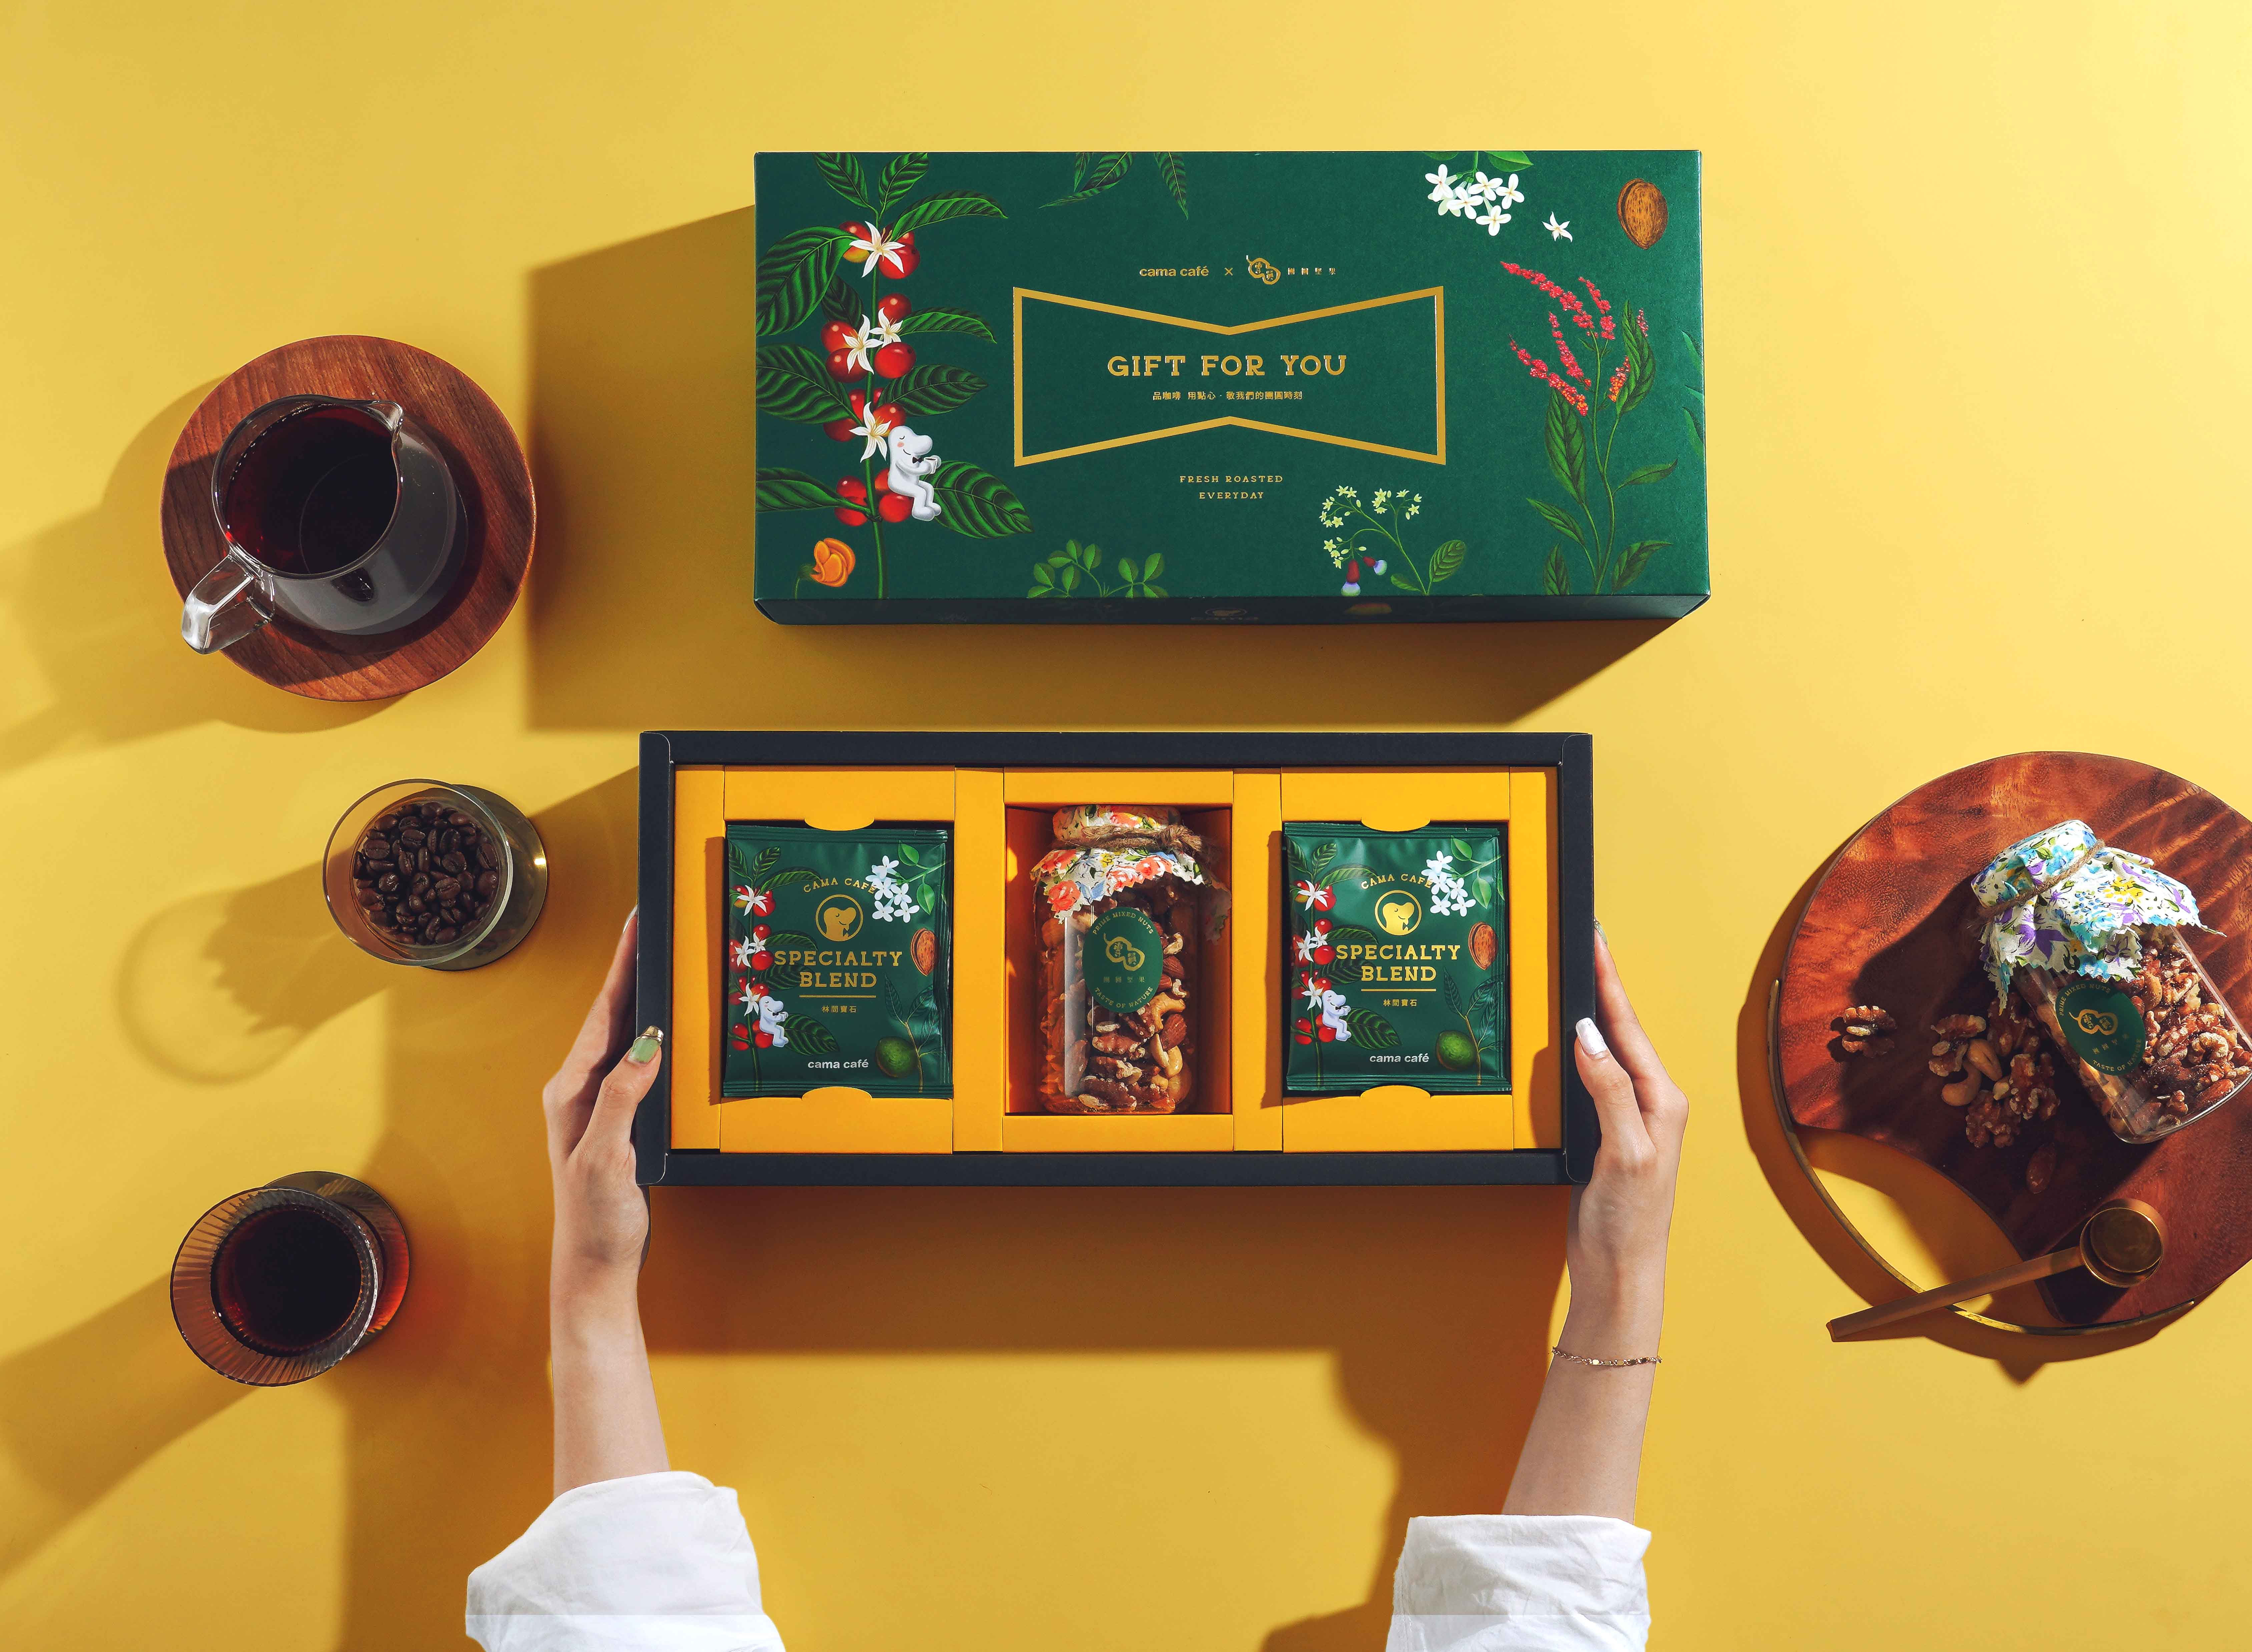 Lung-Hao Chiang Creates Brand Identity and Packaging Design for Cama Café’s Moon Festival Gift Pack